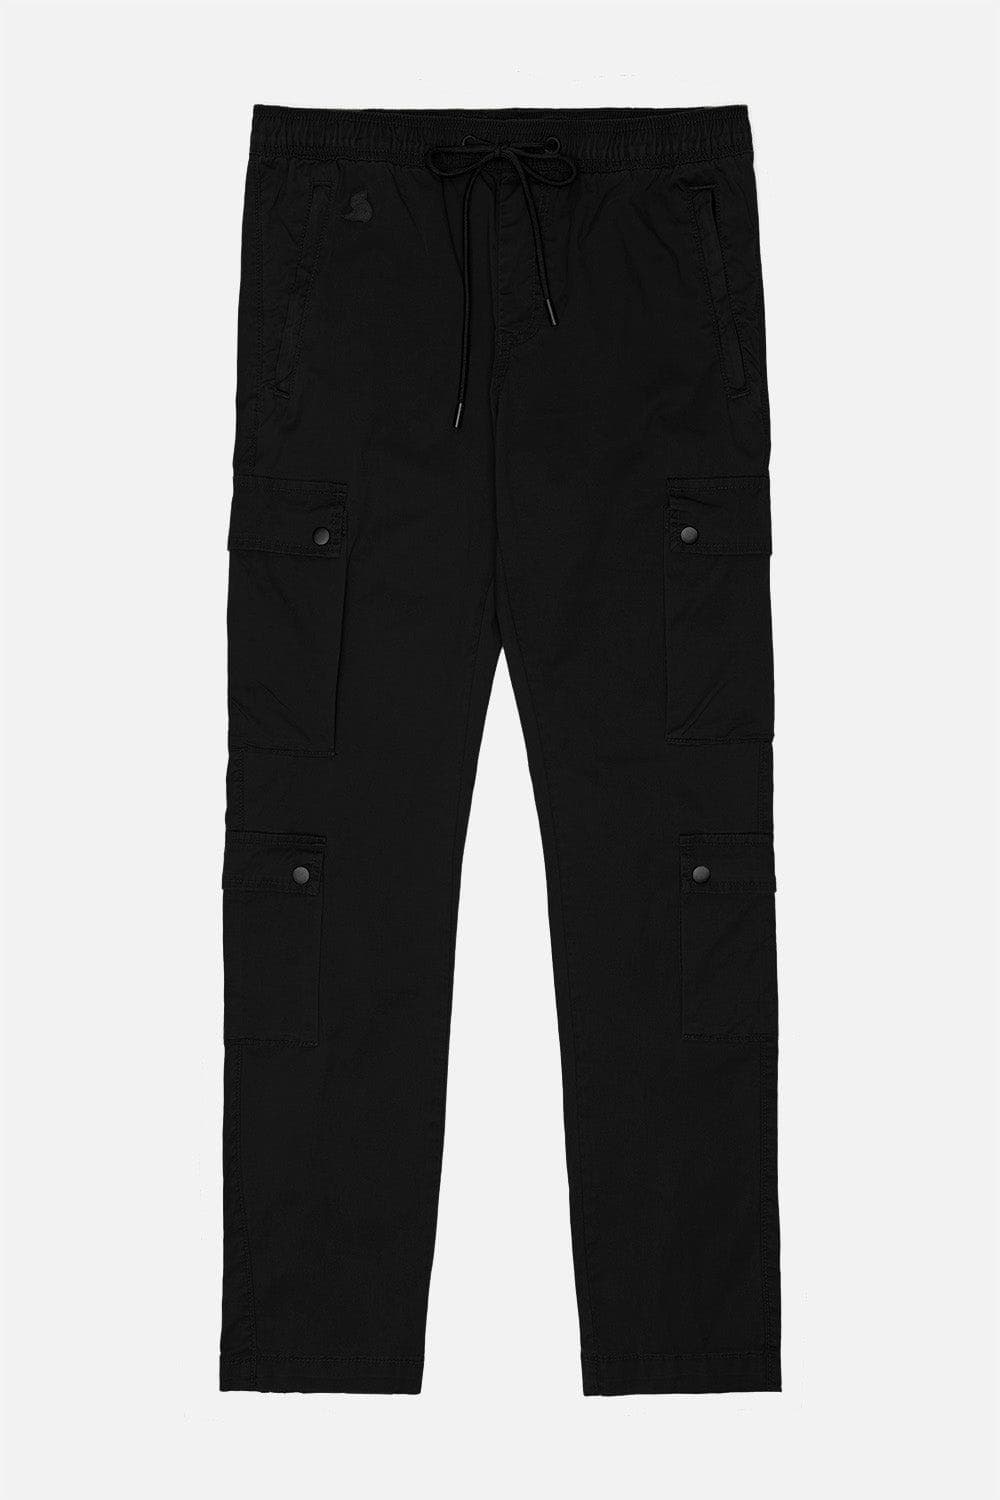 Structure 4-Pockets Zip-Fly Scrub Pant